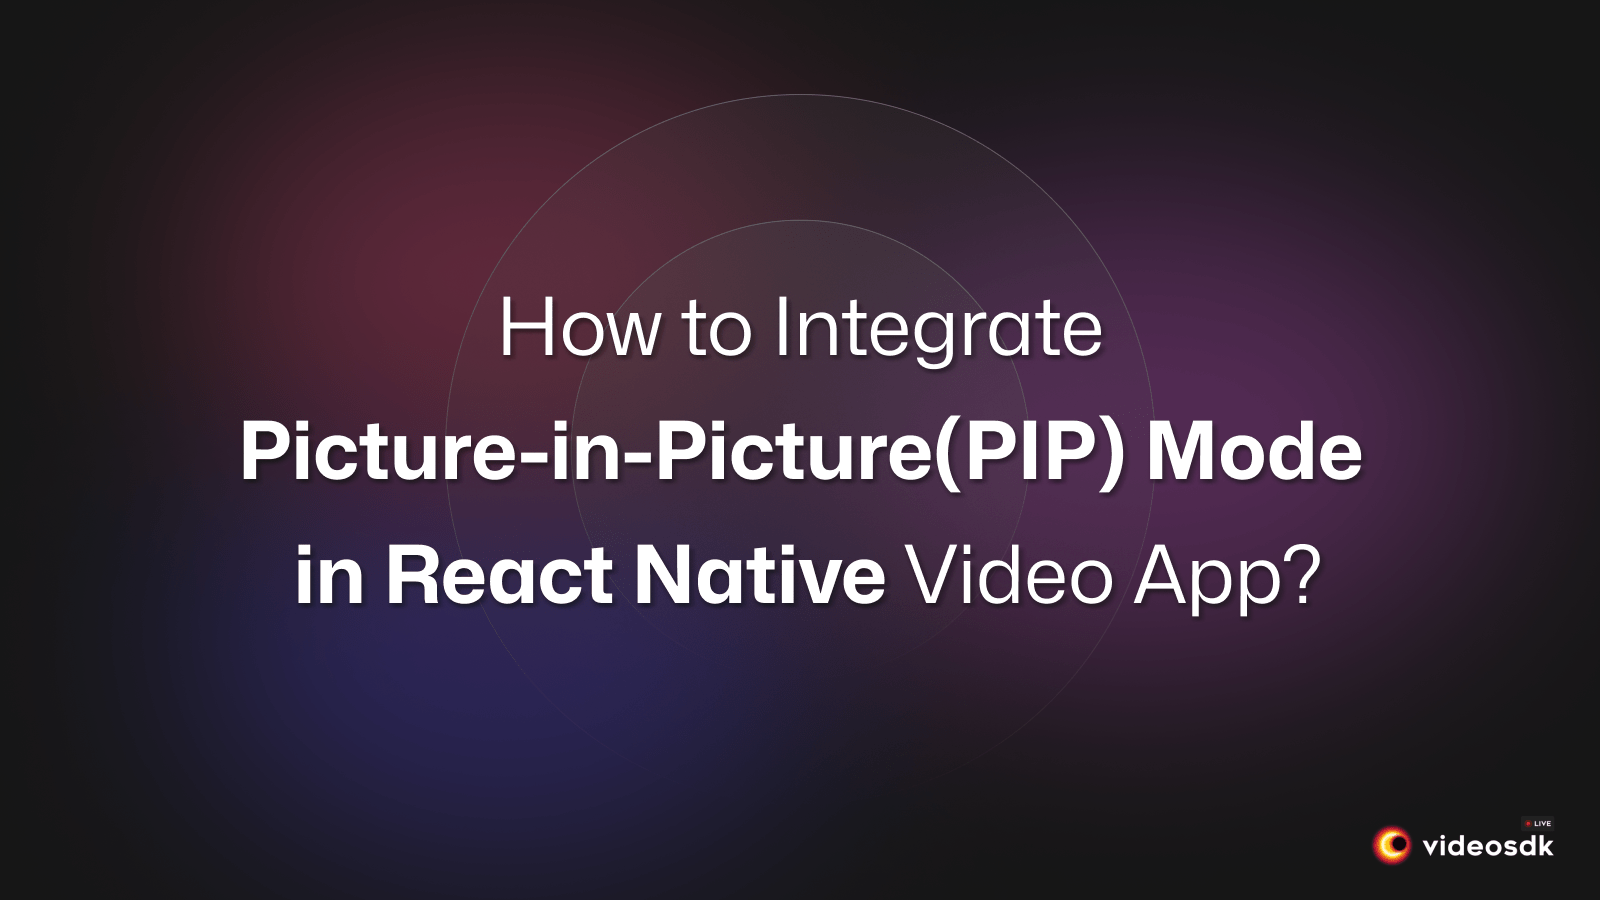 How to Implement Picture-in-Picture(PIP) Mode in React Native (Android)?